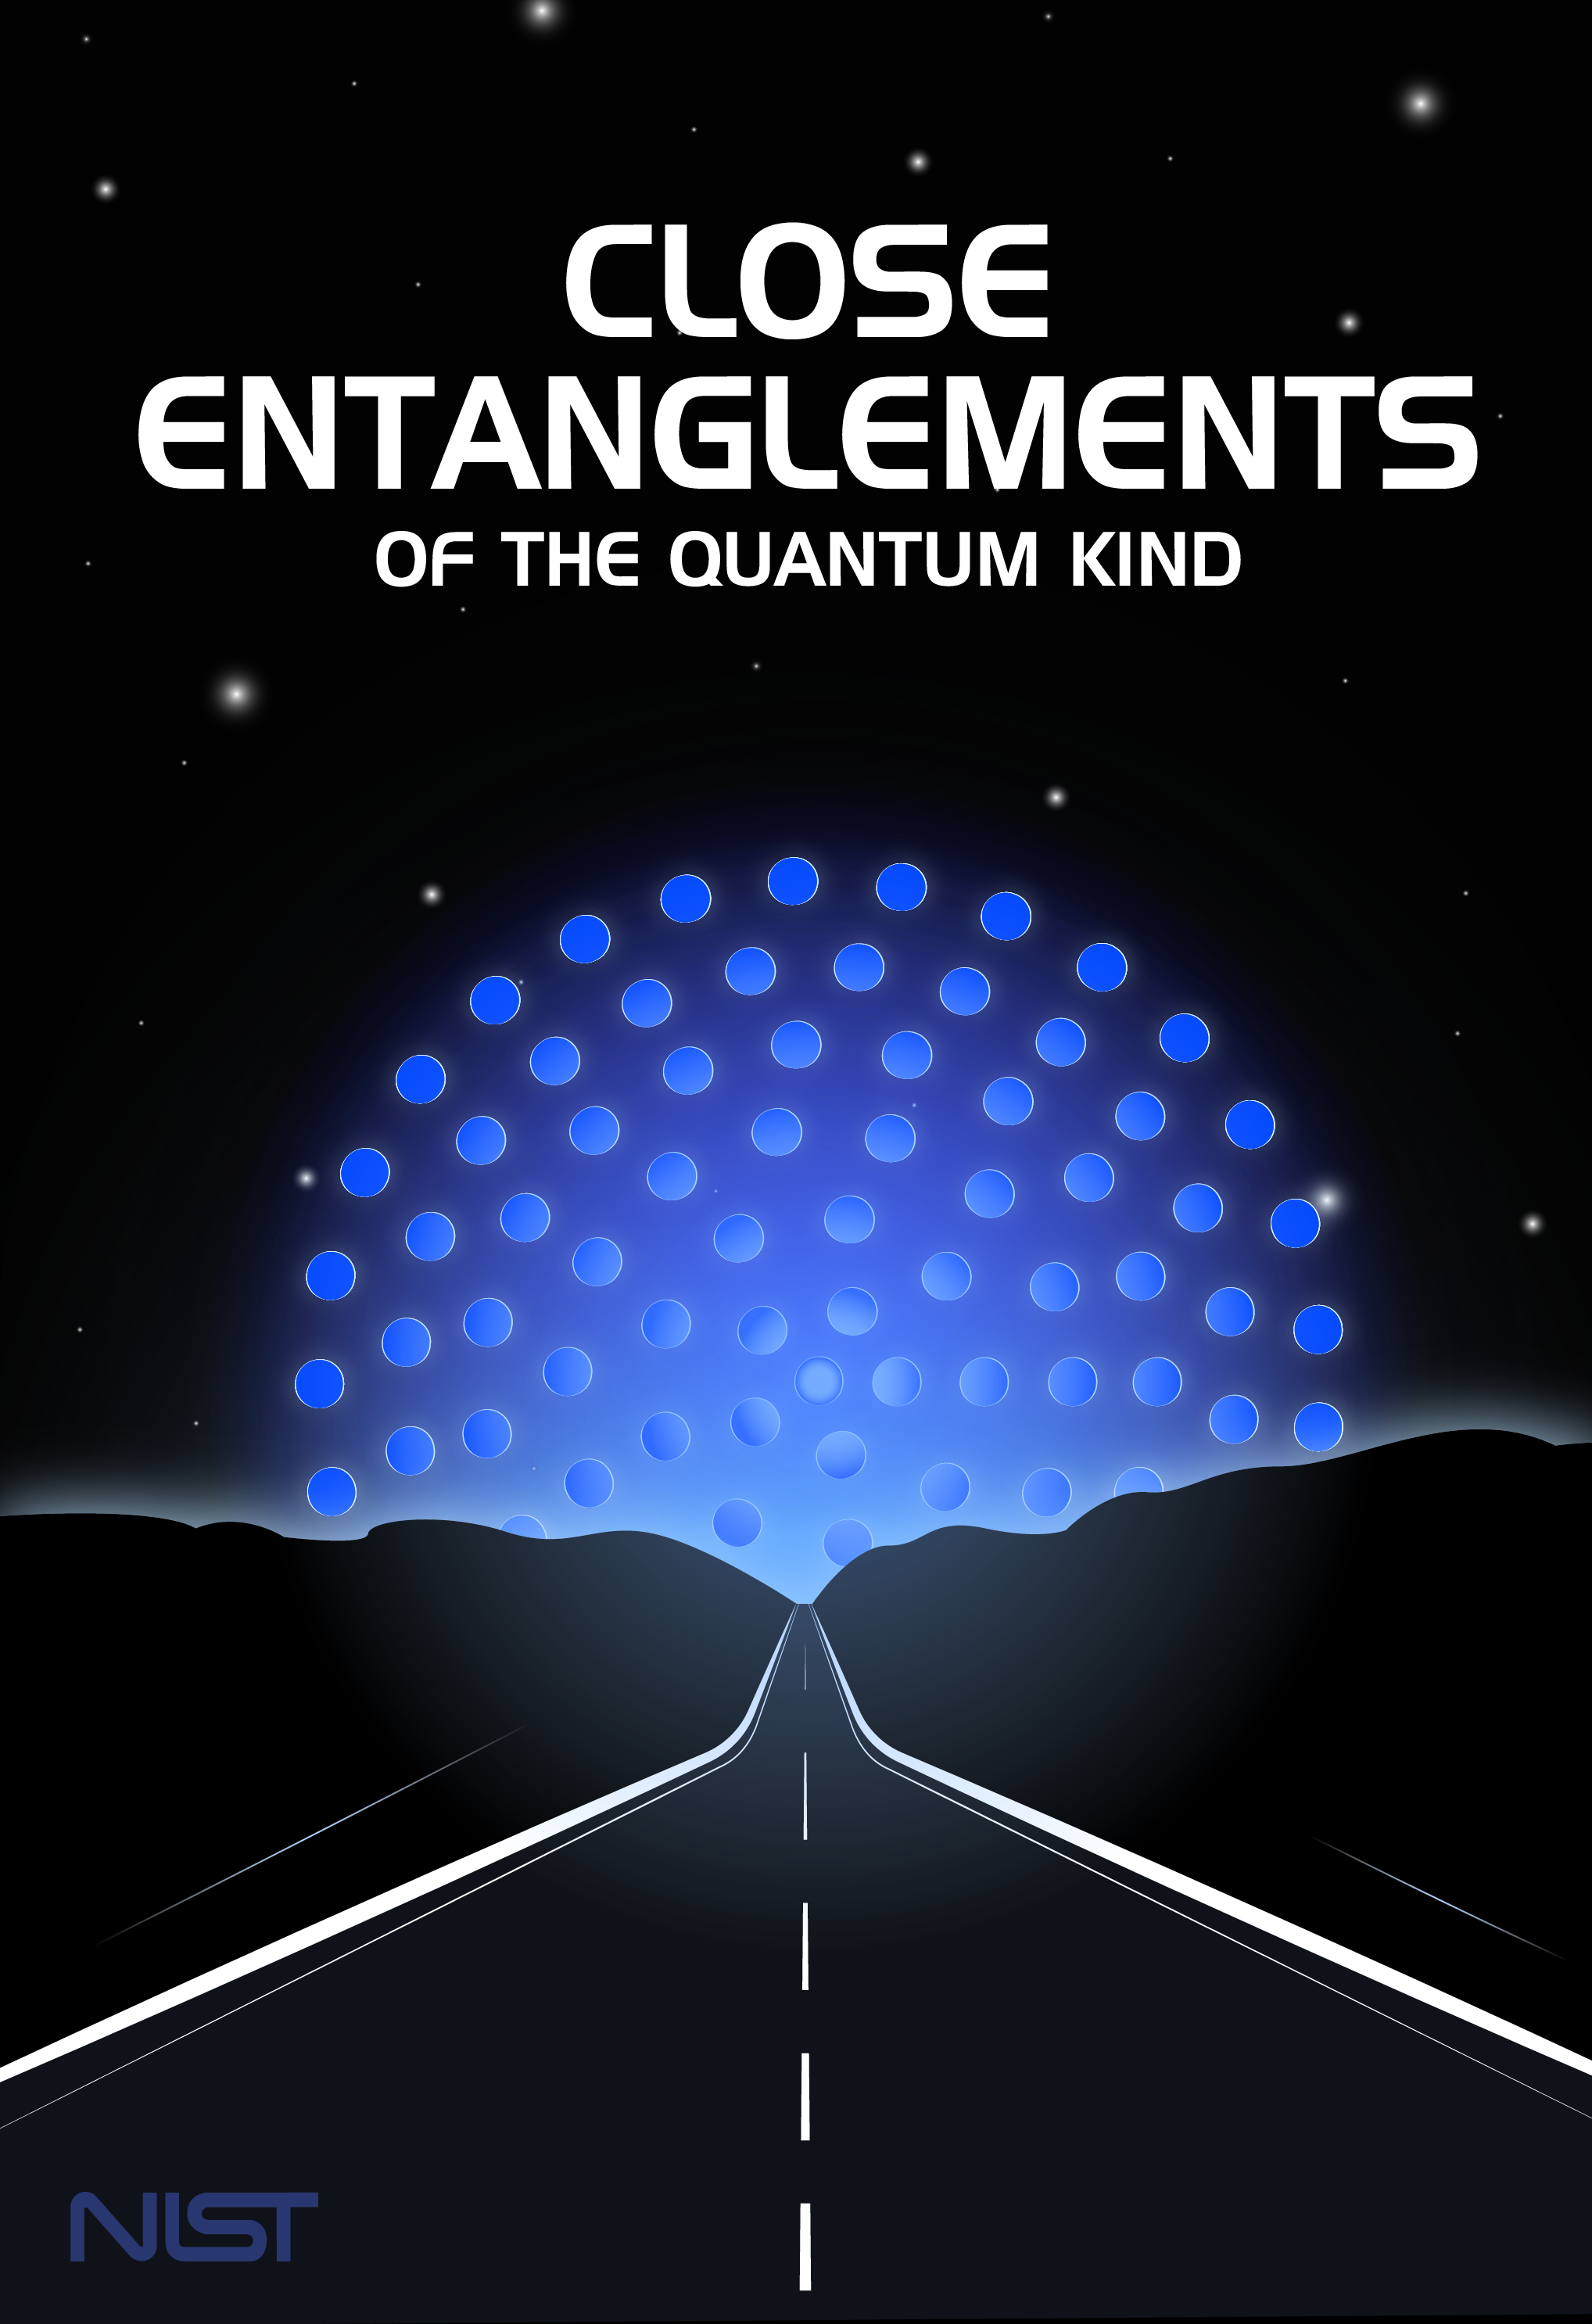 Black background. White text up top: Close Entanglements of the Quantum Kind. Road at bottom coming into meet at horizon. Blue ball of light at horizon